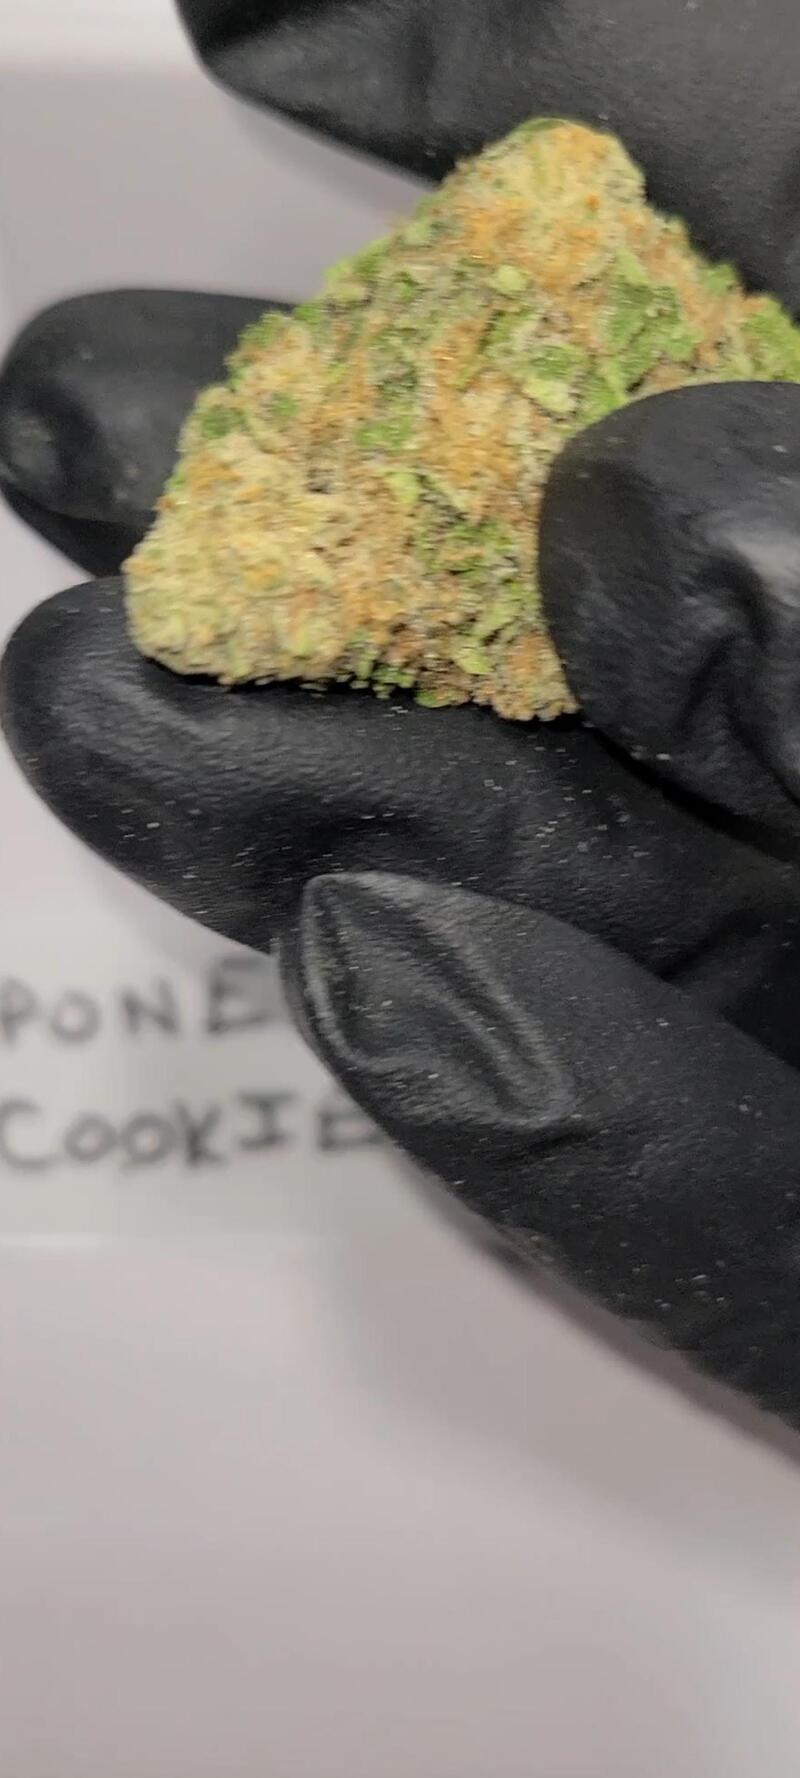 CAPONE COOKIES